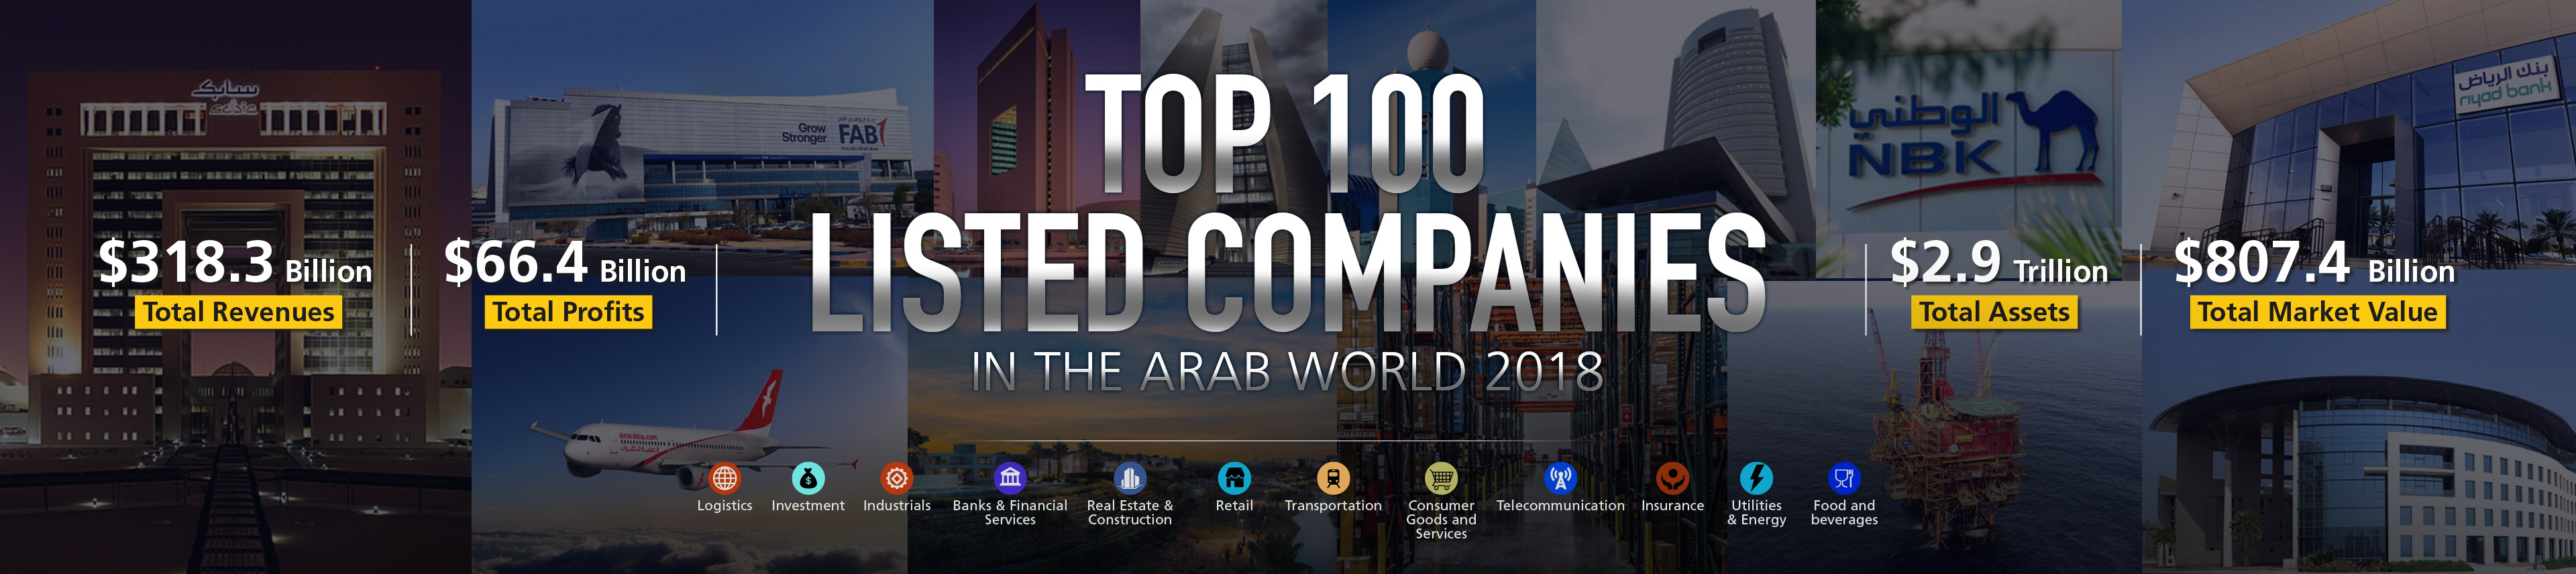 Top 100 Listed Companies In The Arab World 2018